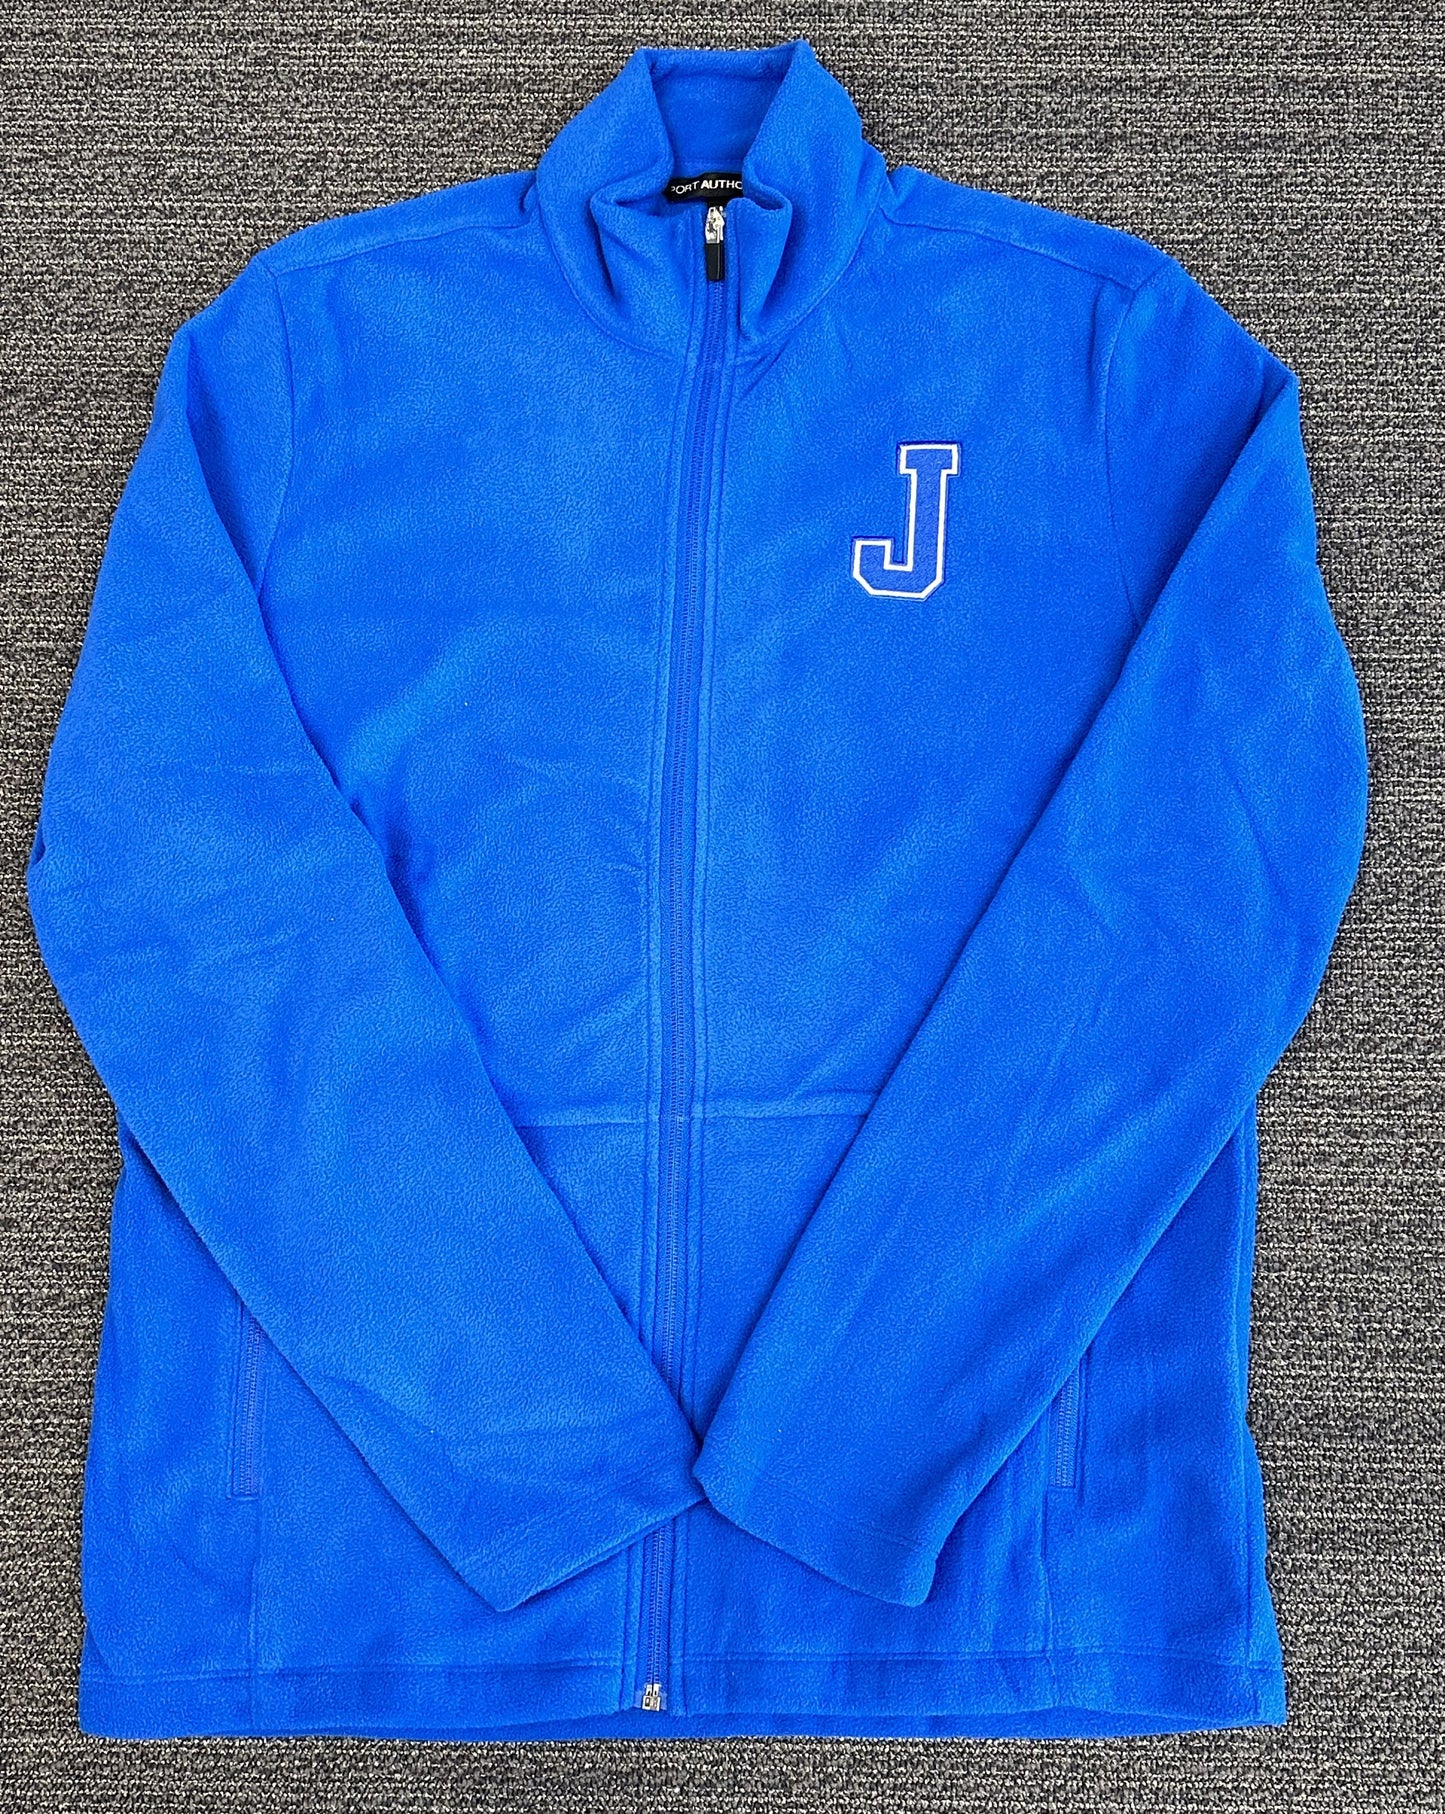 Port Authority.  100% Polyester/13.8 ounce.  Twill-taped neck. Full zip w/zippered pockets. Soft fleece jacket will keep you warm!  Embroidered J logo.